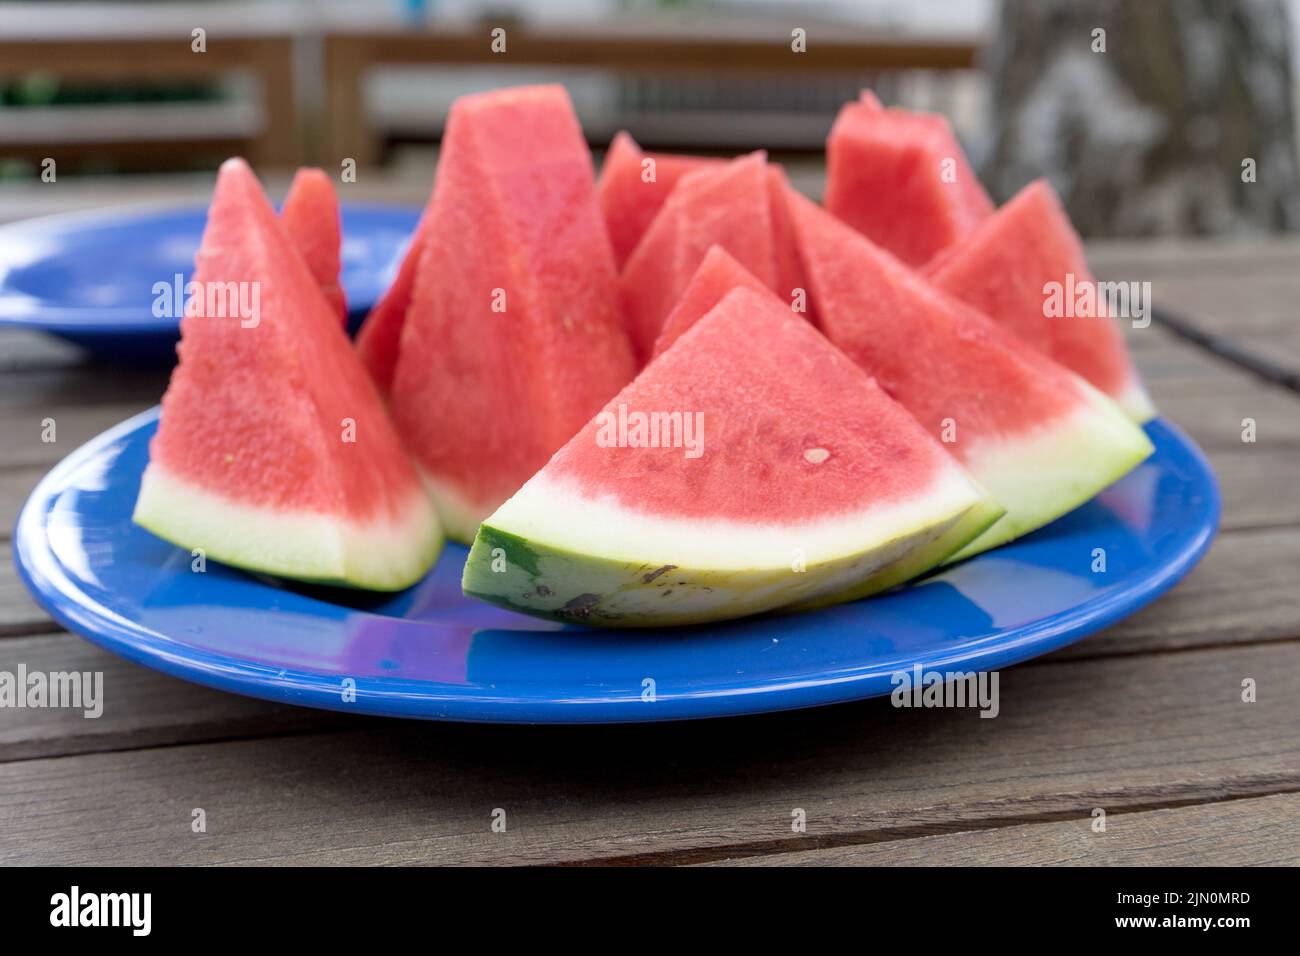 Pieces of melon on a blue plate Stock Photo